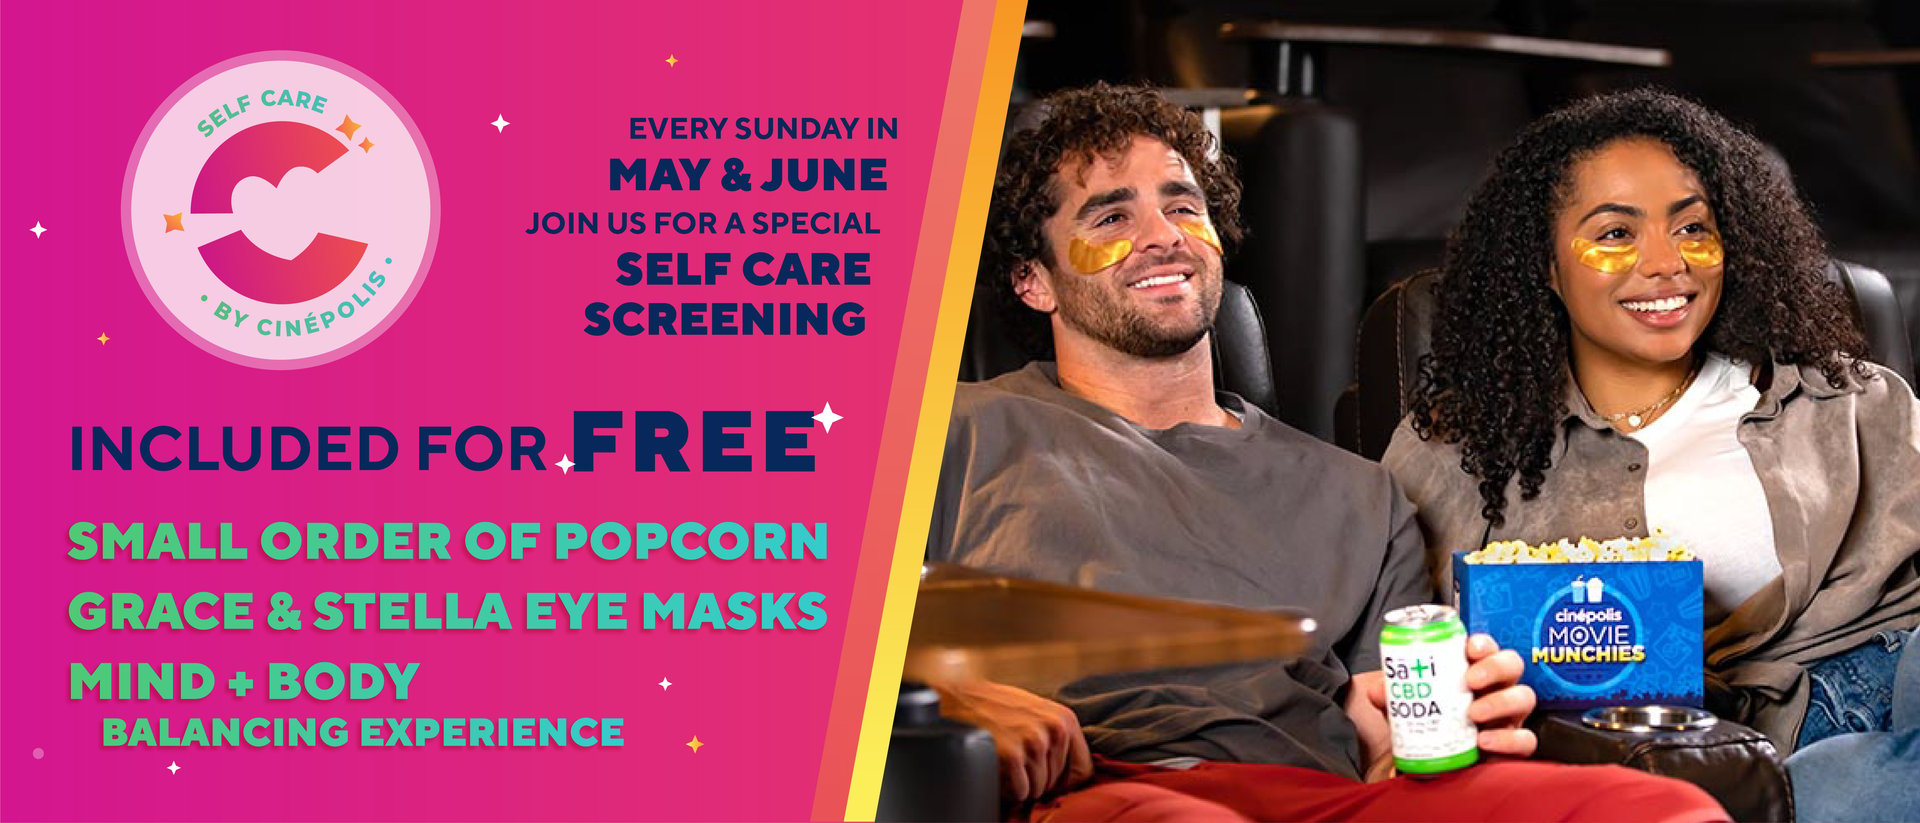 Get tickets for Self Care Sunday Screenings!